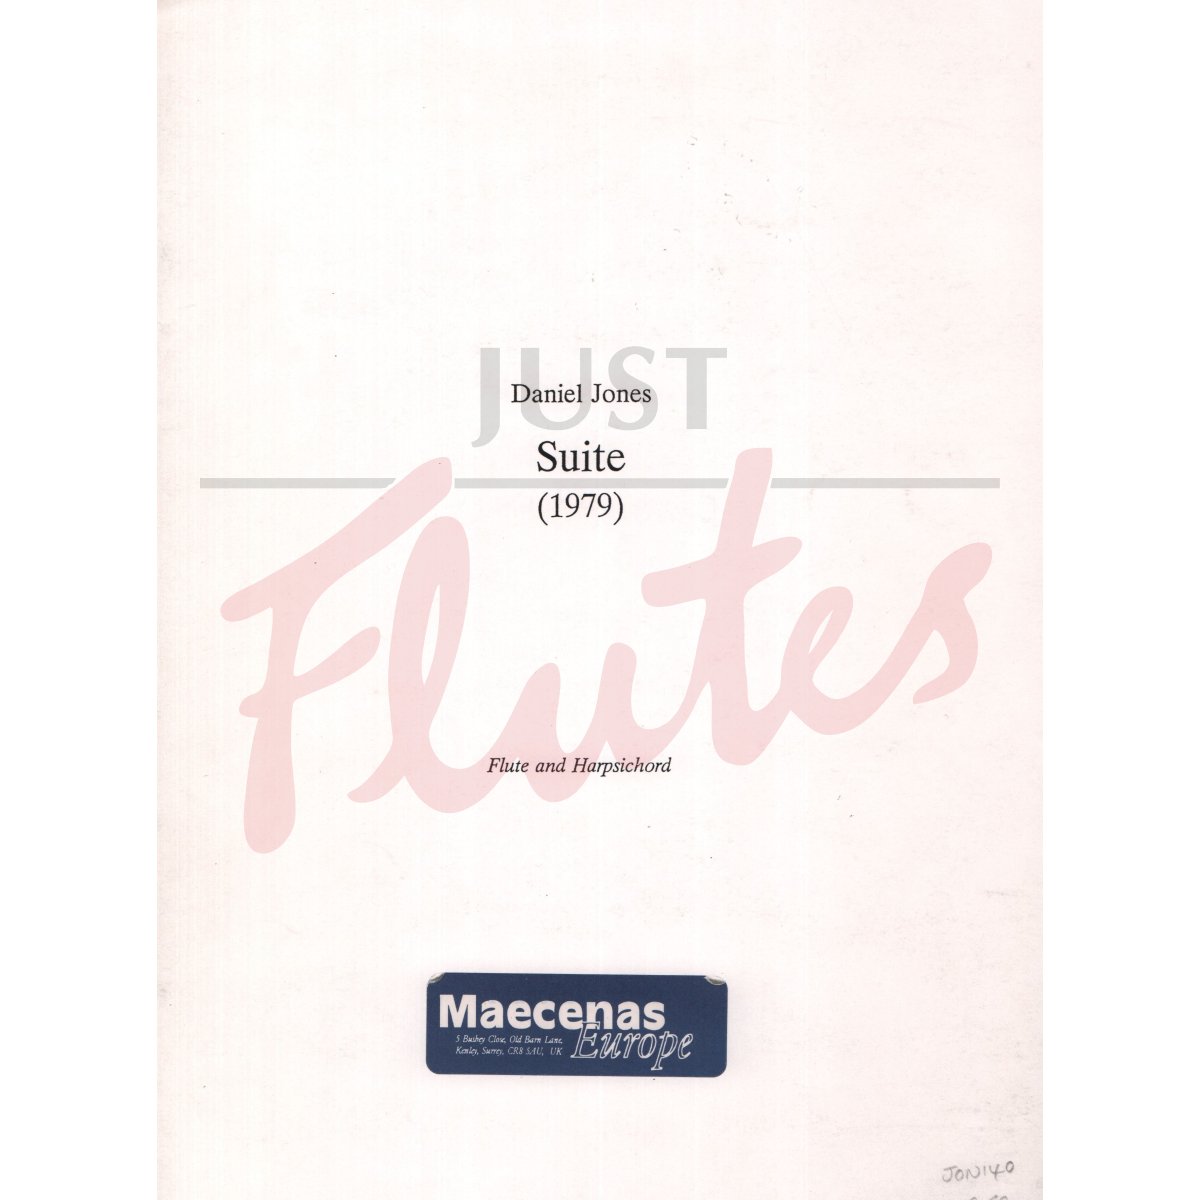 Suite for Flute and Harpsichord